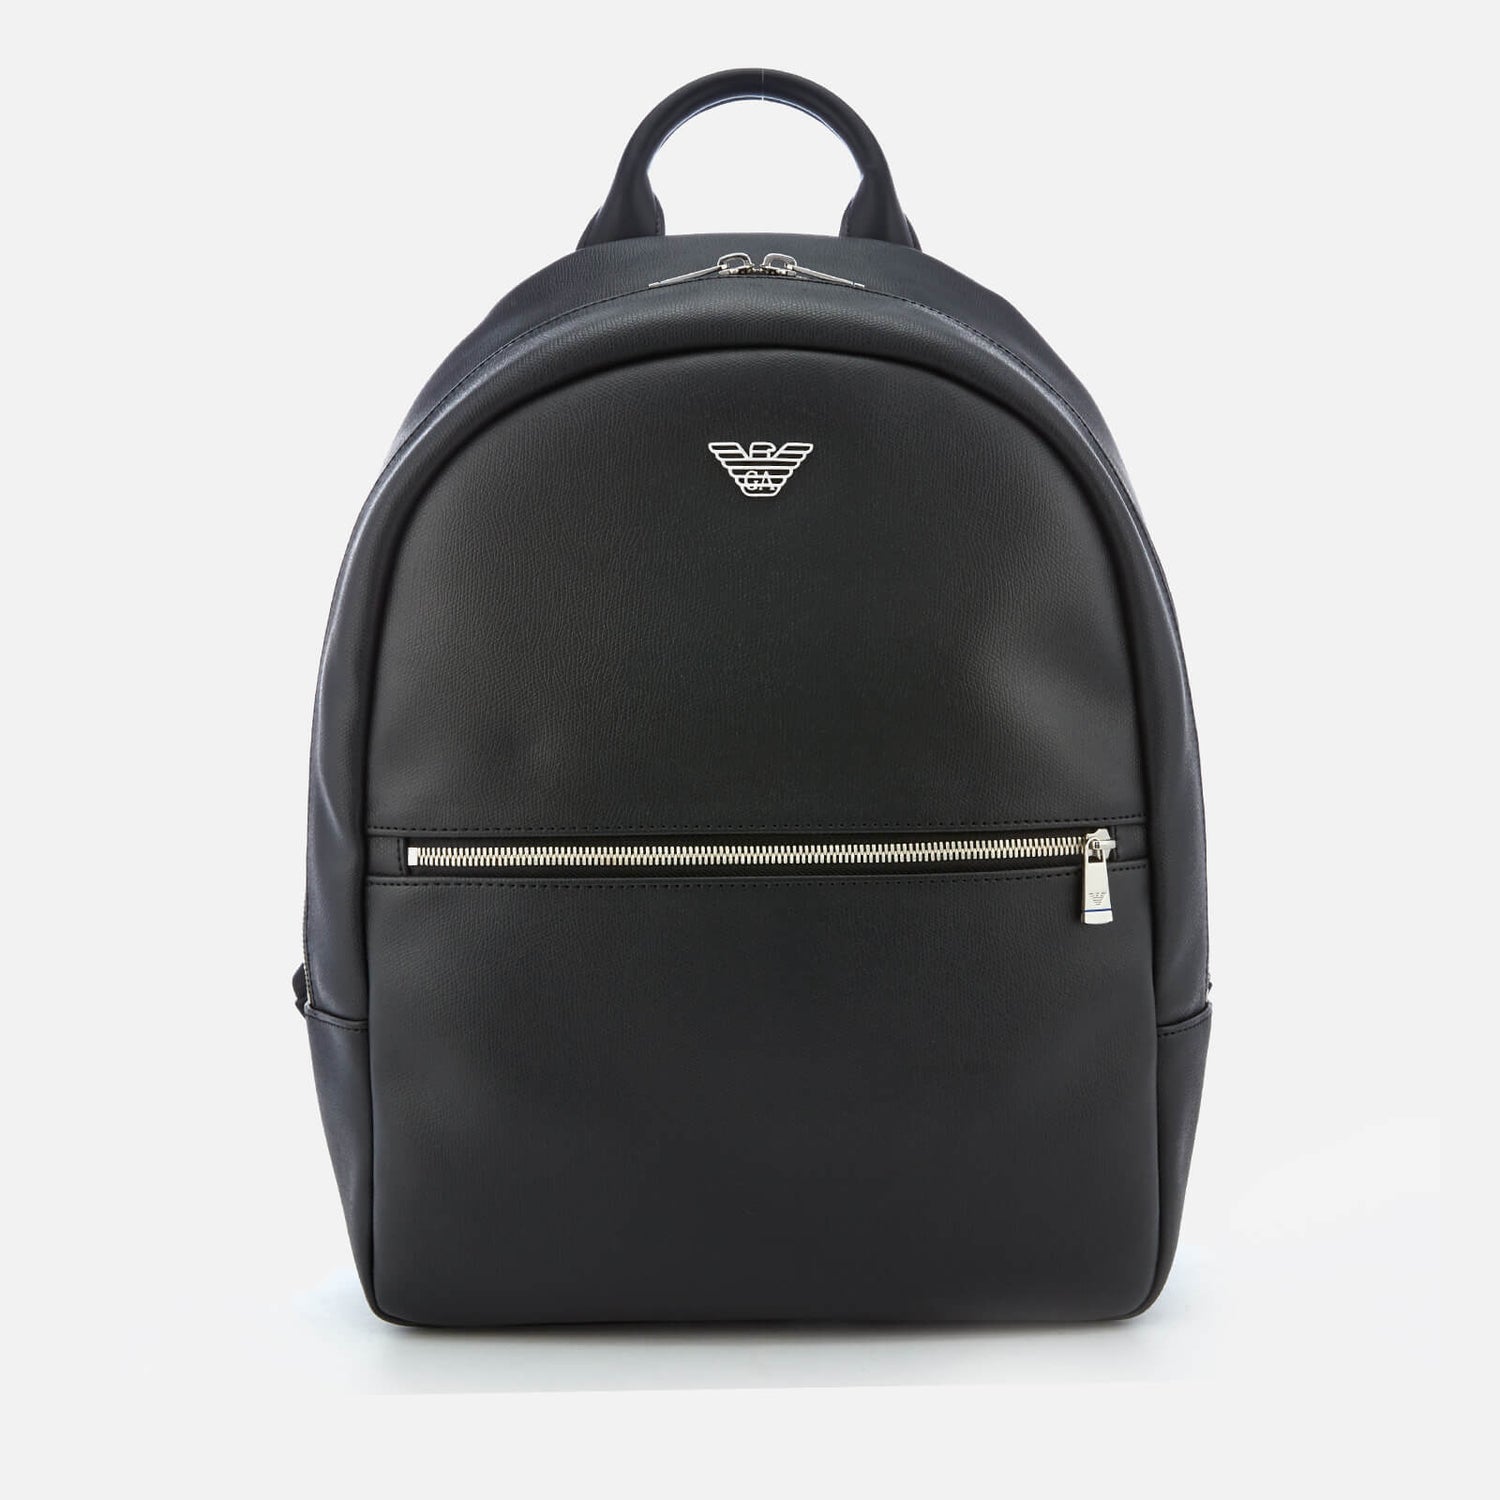 Emporio Armani Men's Backpack - Black - Free UK Delivery Available